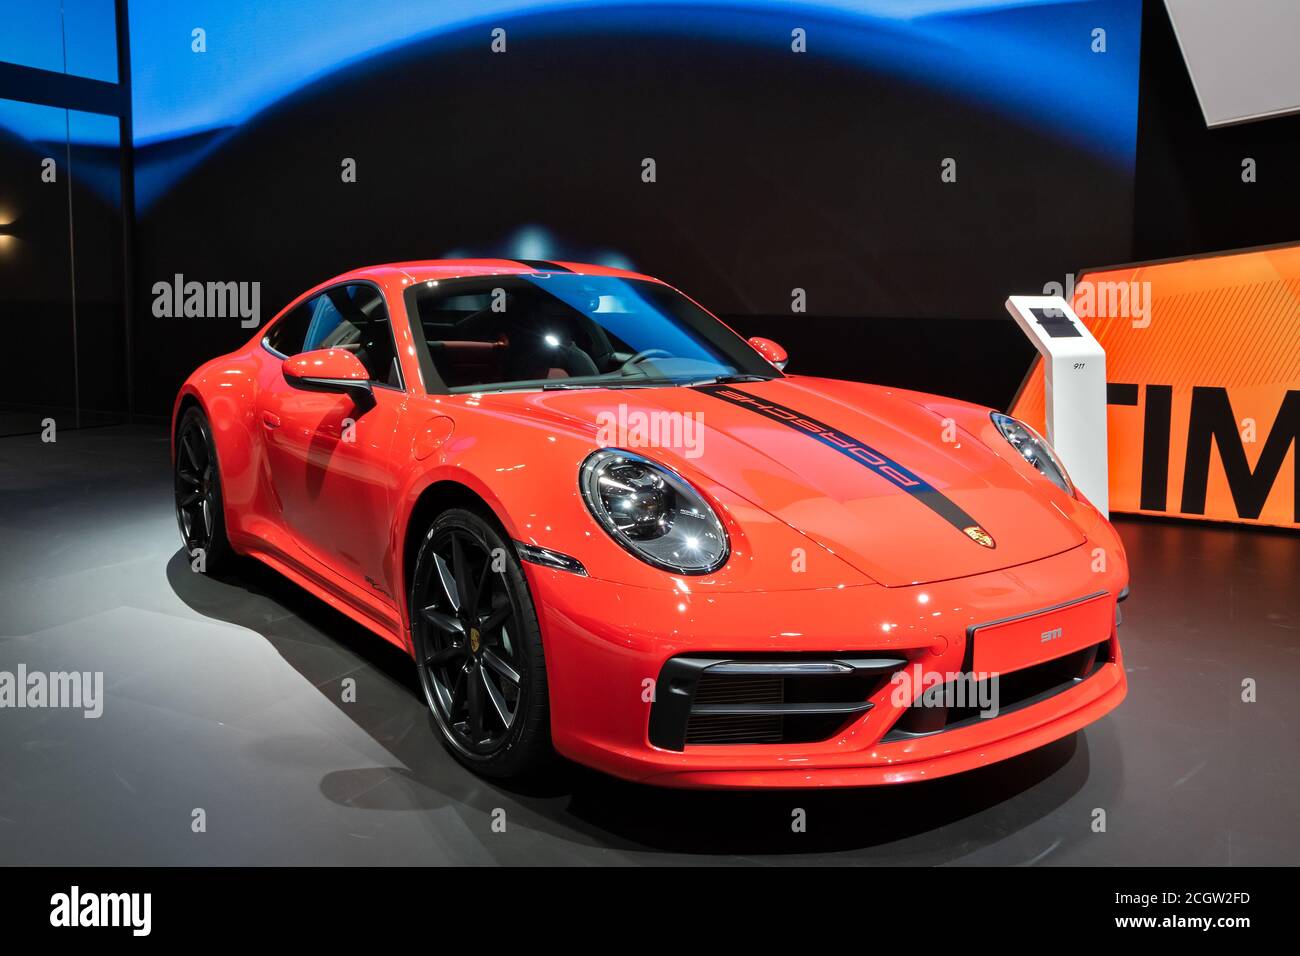 BRUSSELS - JAN 9, 2020: Porsche 911 Carrera sports car showcased at the Brussels Autosalon 2020 Motor Show. Stock Photo